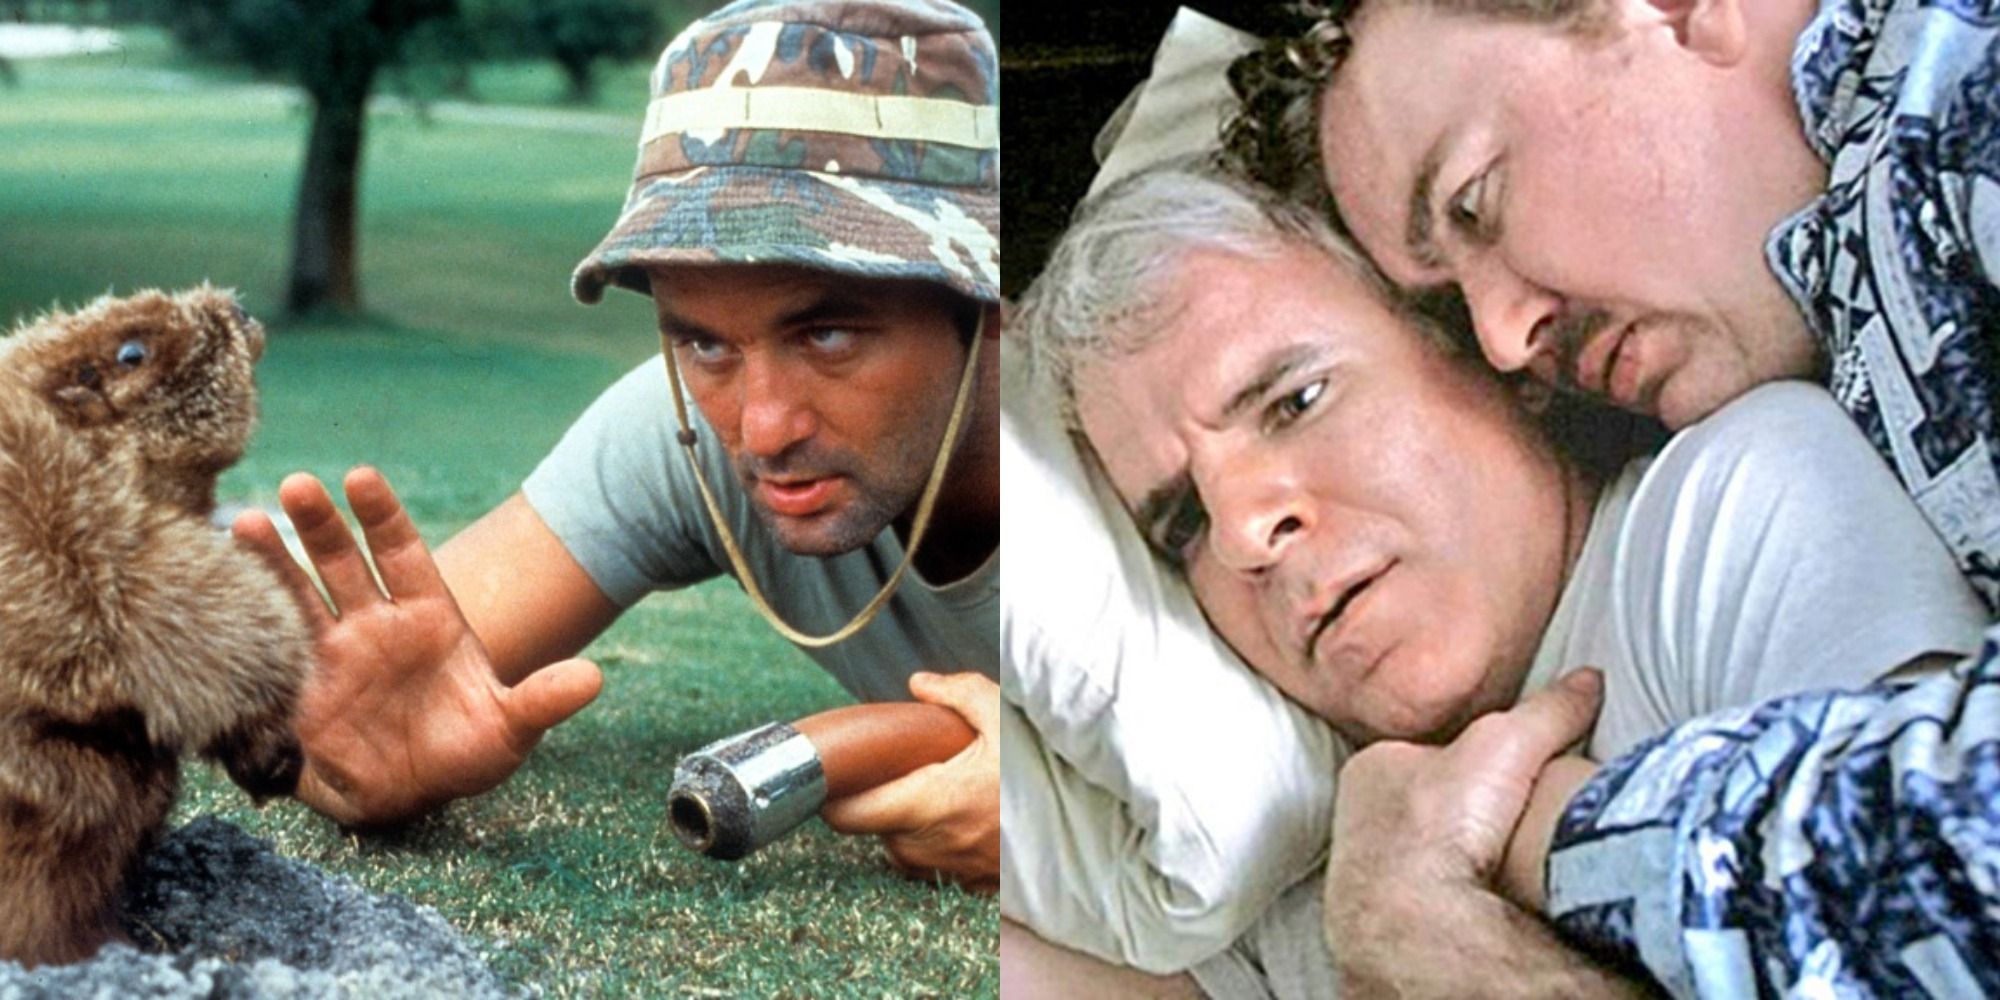 Two side by side images from Caddyshack and Planes, Trains & Automobiles